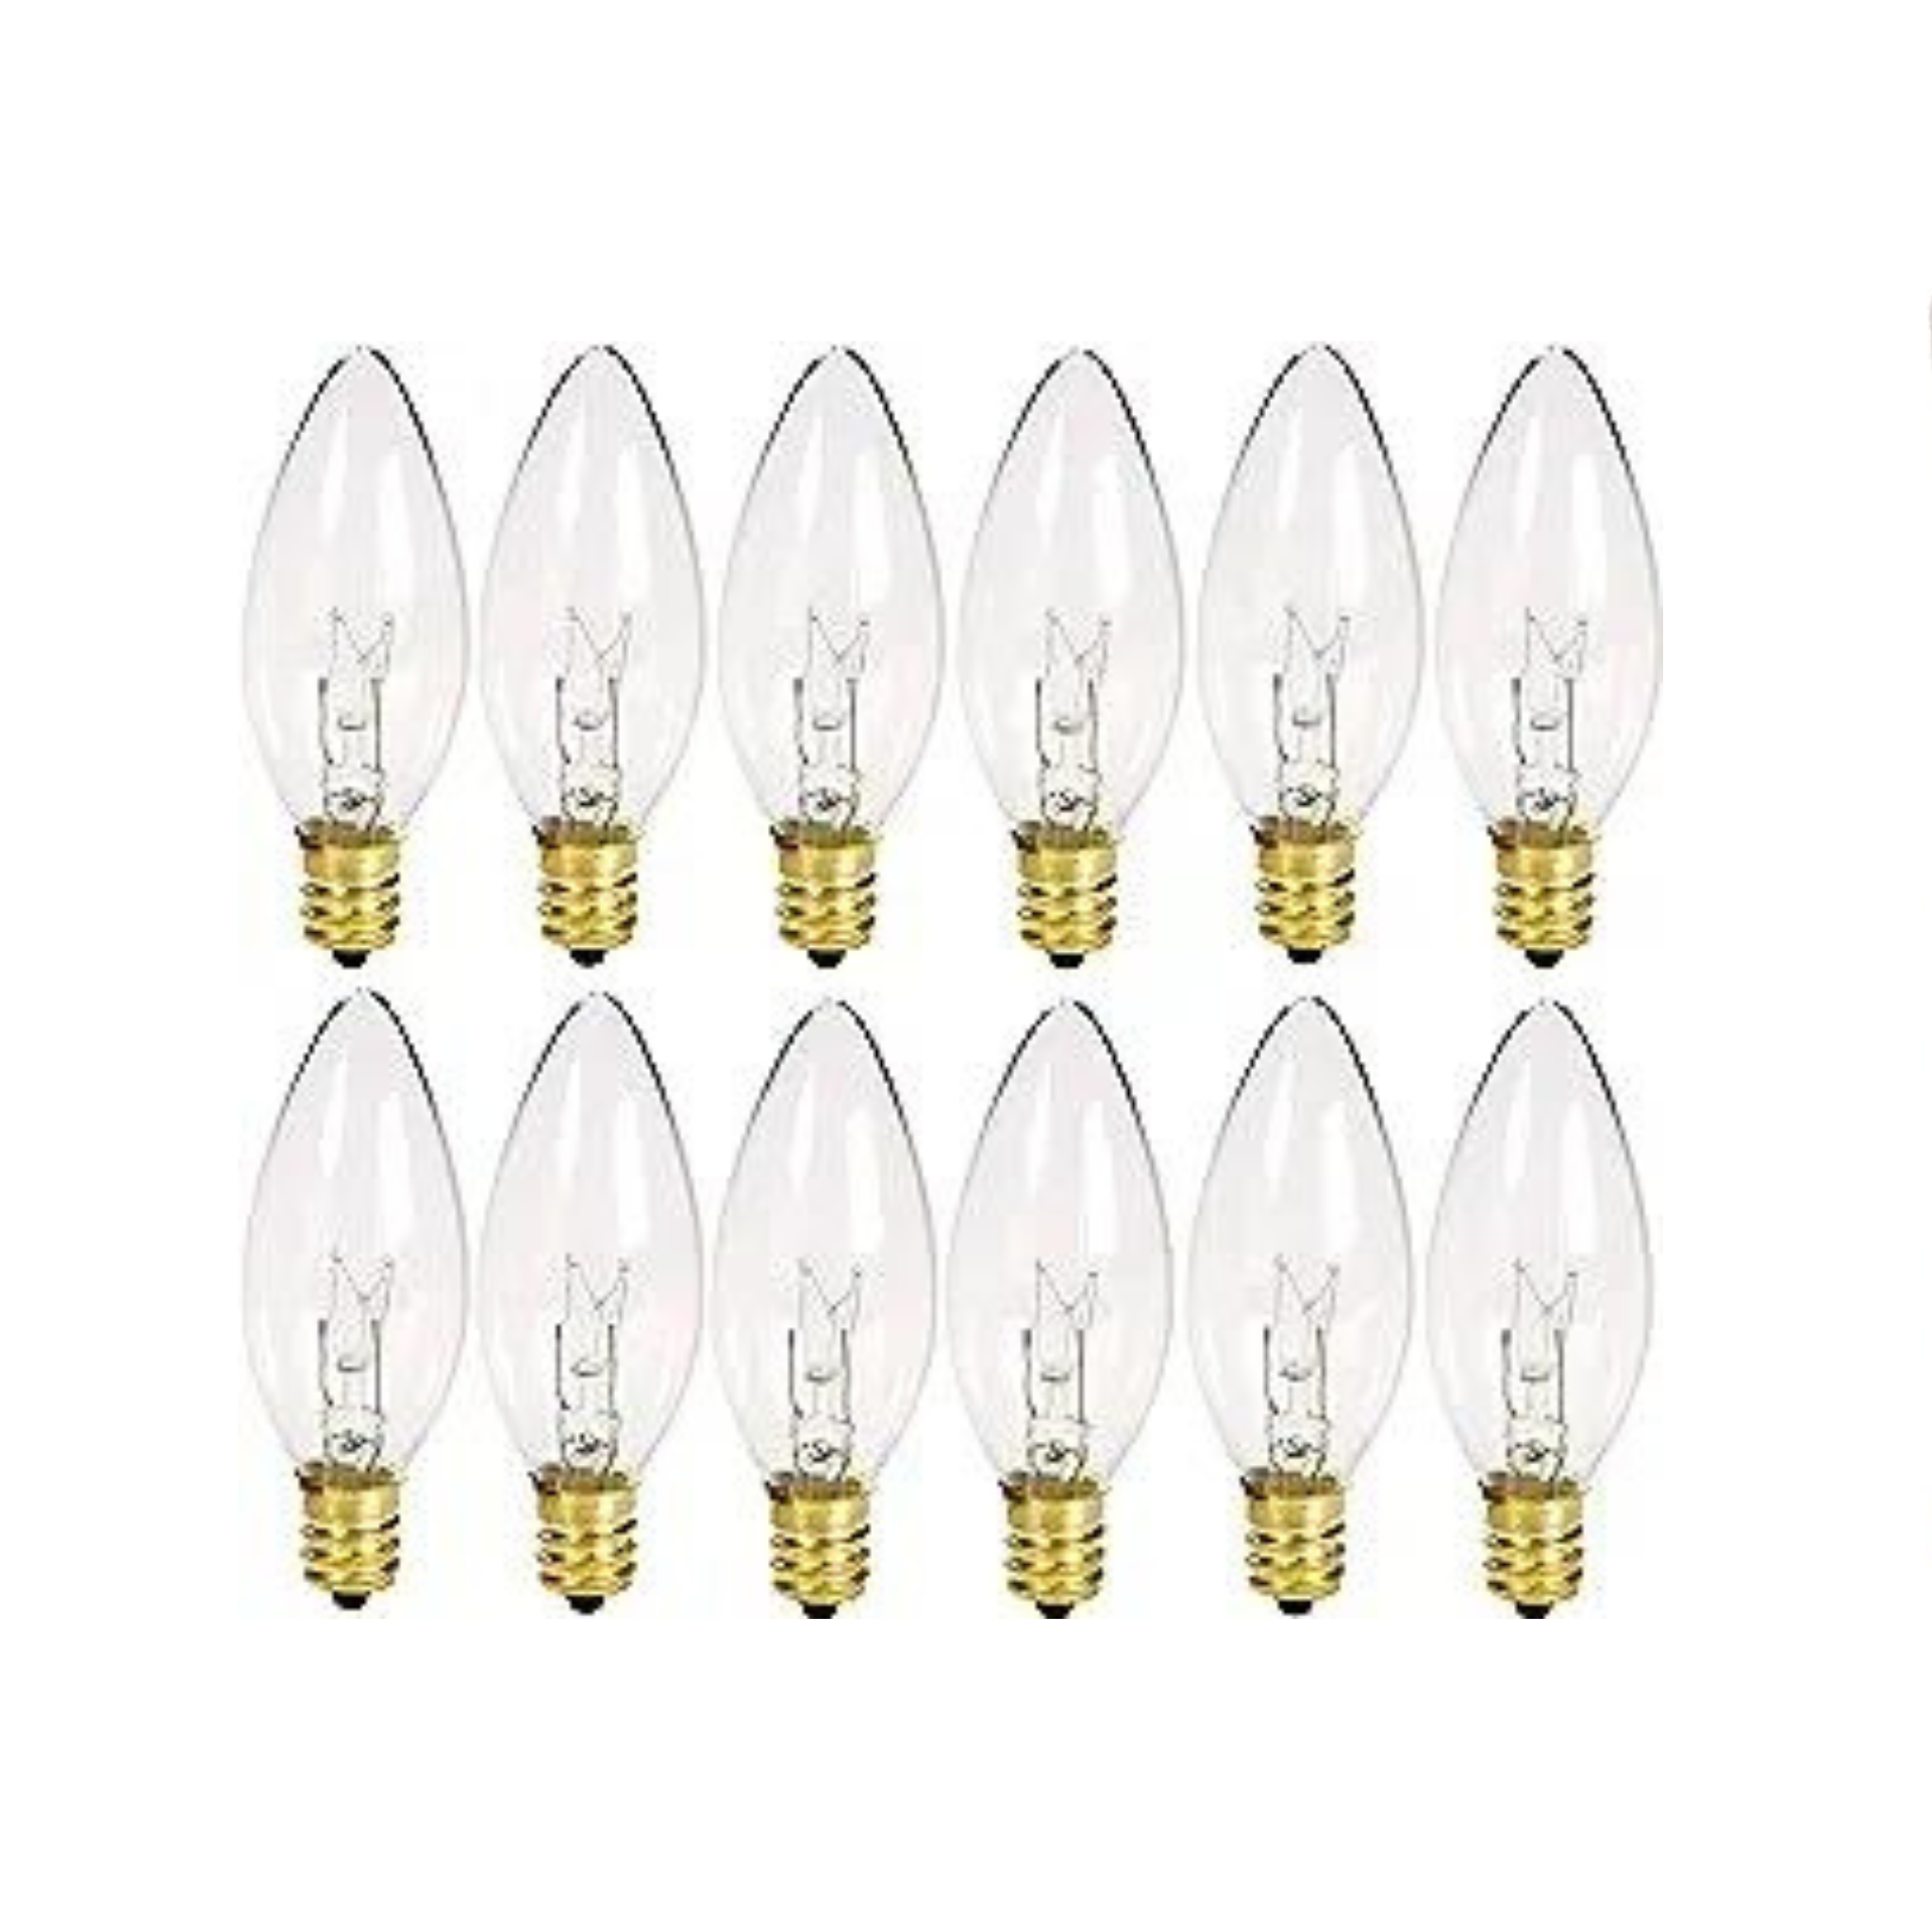 Pack of 12 Crystal Clear Torpedo Tip Candelabra Replacement Bulbs (7W – 120 Volts – E12)